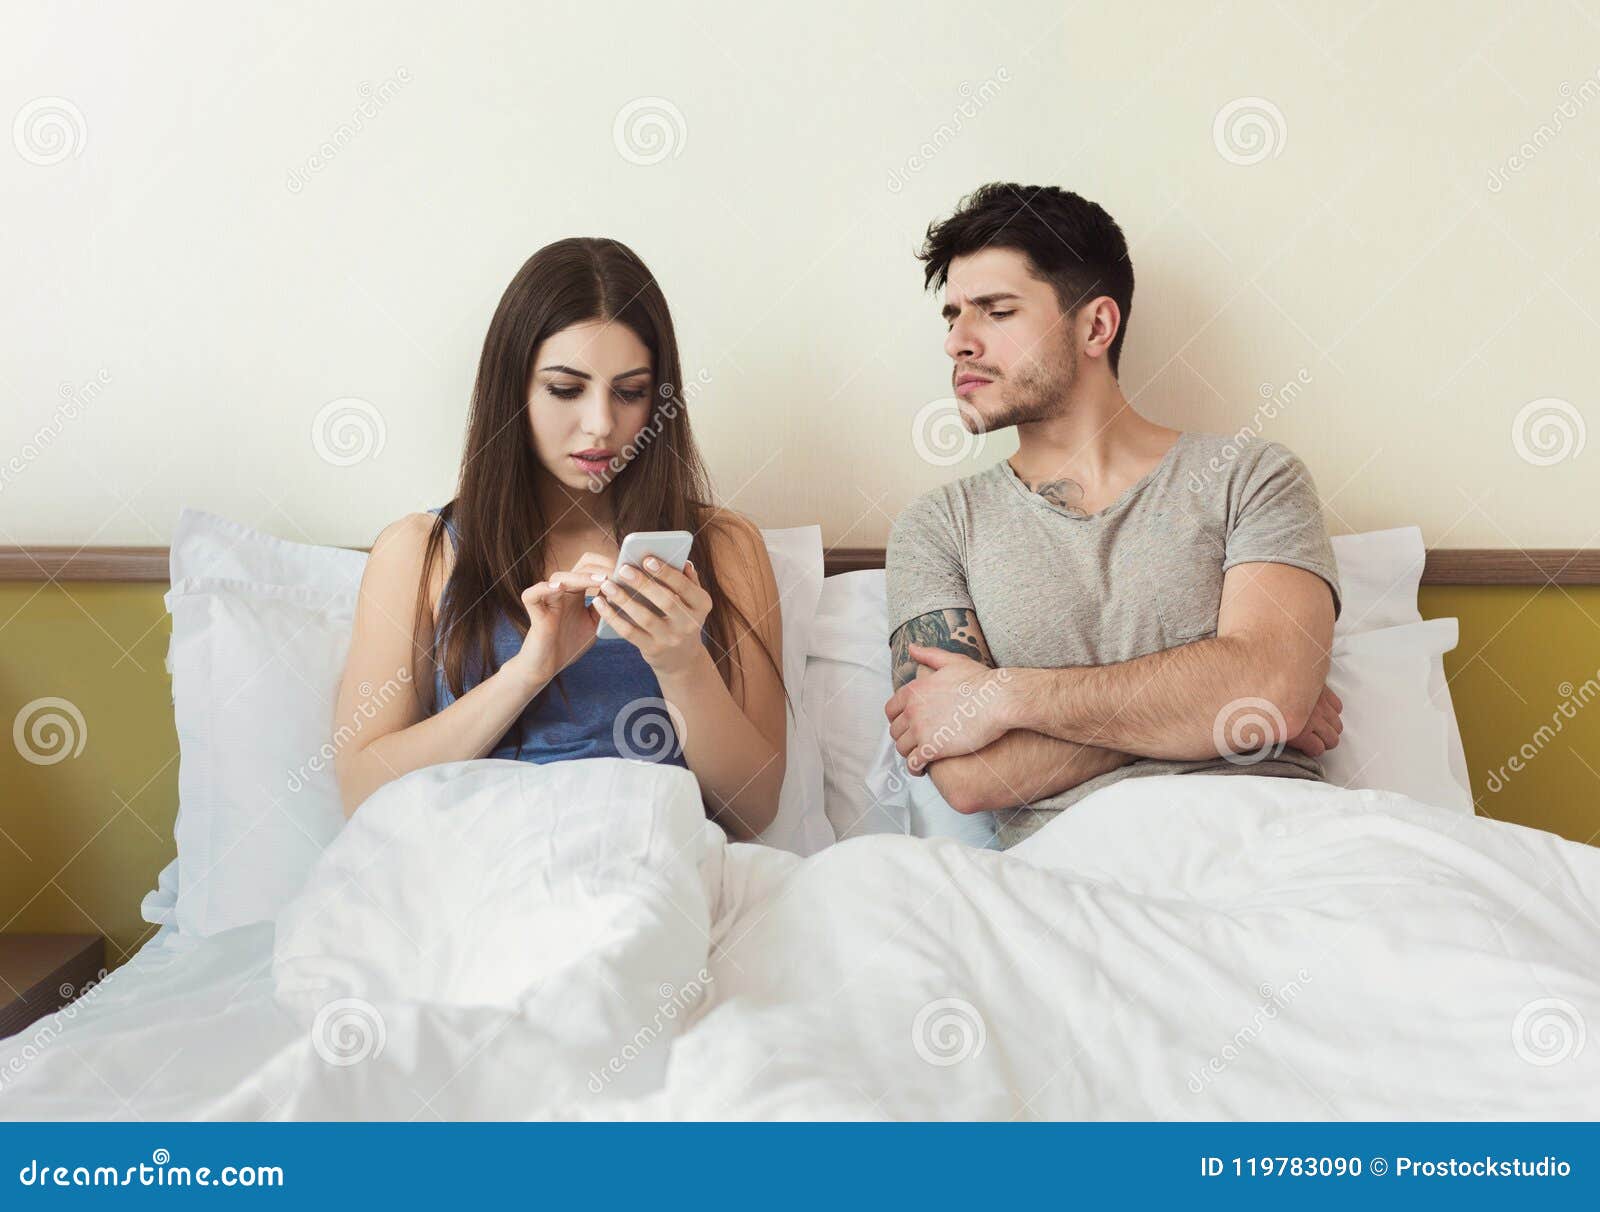 Jealous Husband Watching His Wife Using Mobile Phone Royalty-Fre image